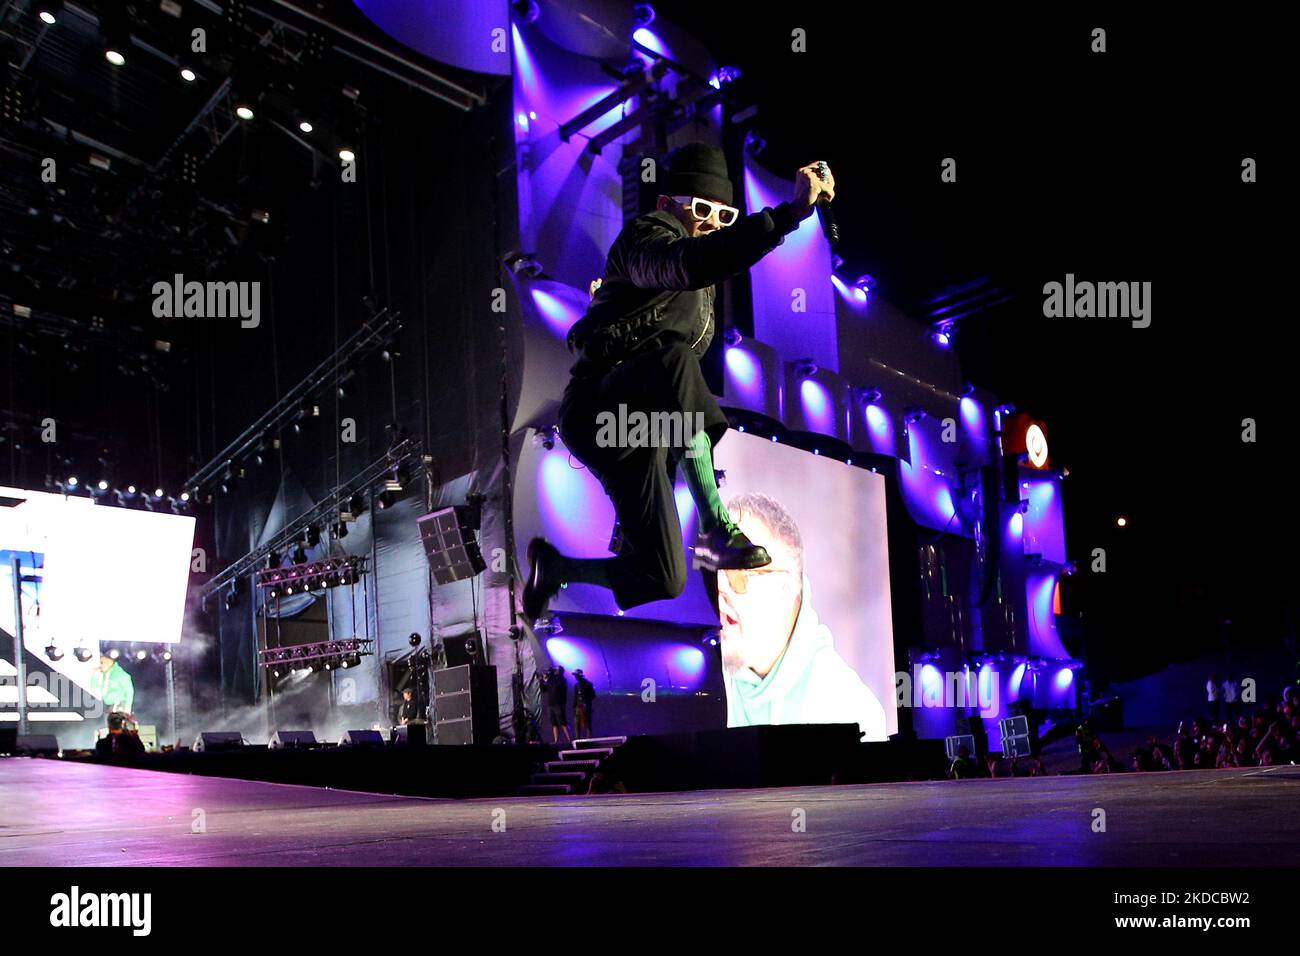 Taboo of US band Black Eyed Peas performs during the Rock in Rio Lisboa 2022 music festival in Lisbon, Portugal, on June 19, 2022. (Photo by Pedro FiÃºza/NurPhoto) Stock Photo